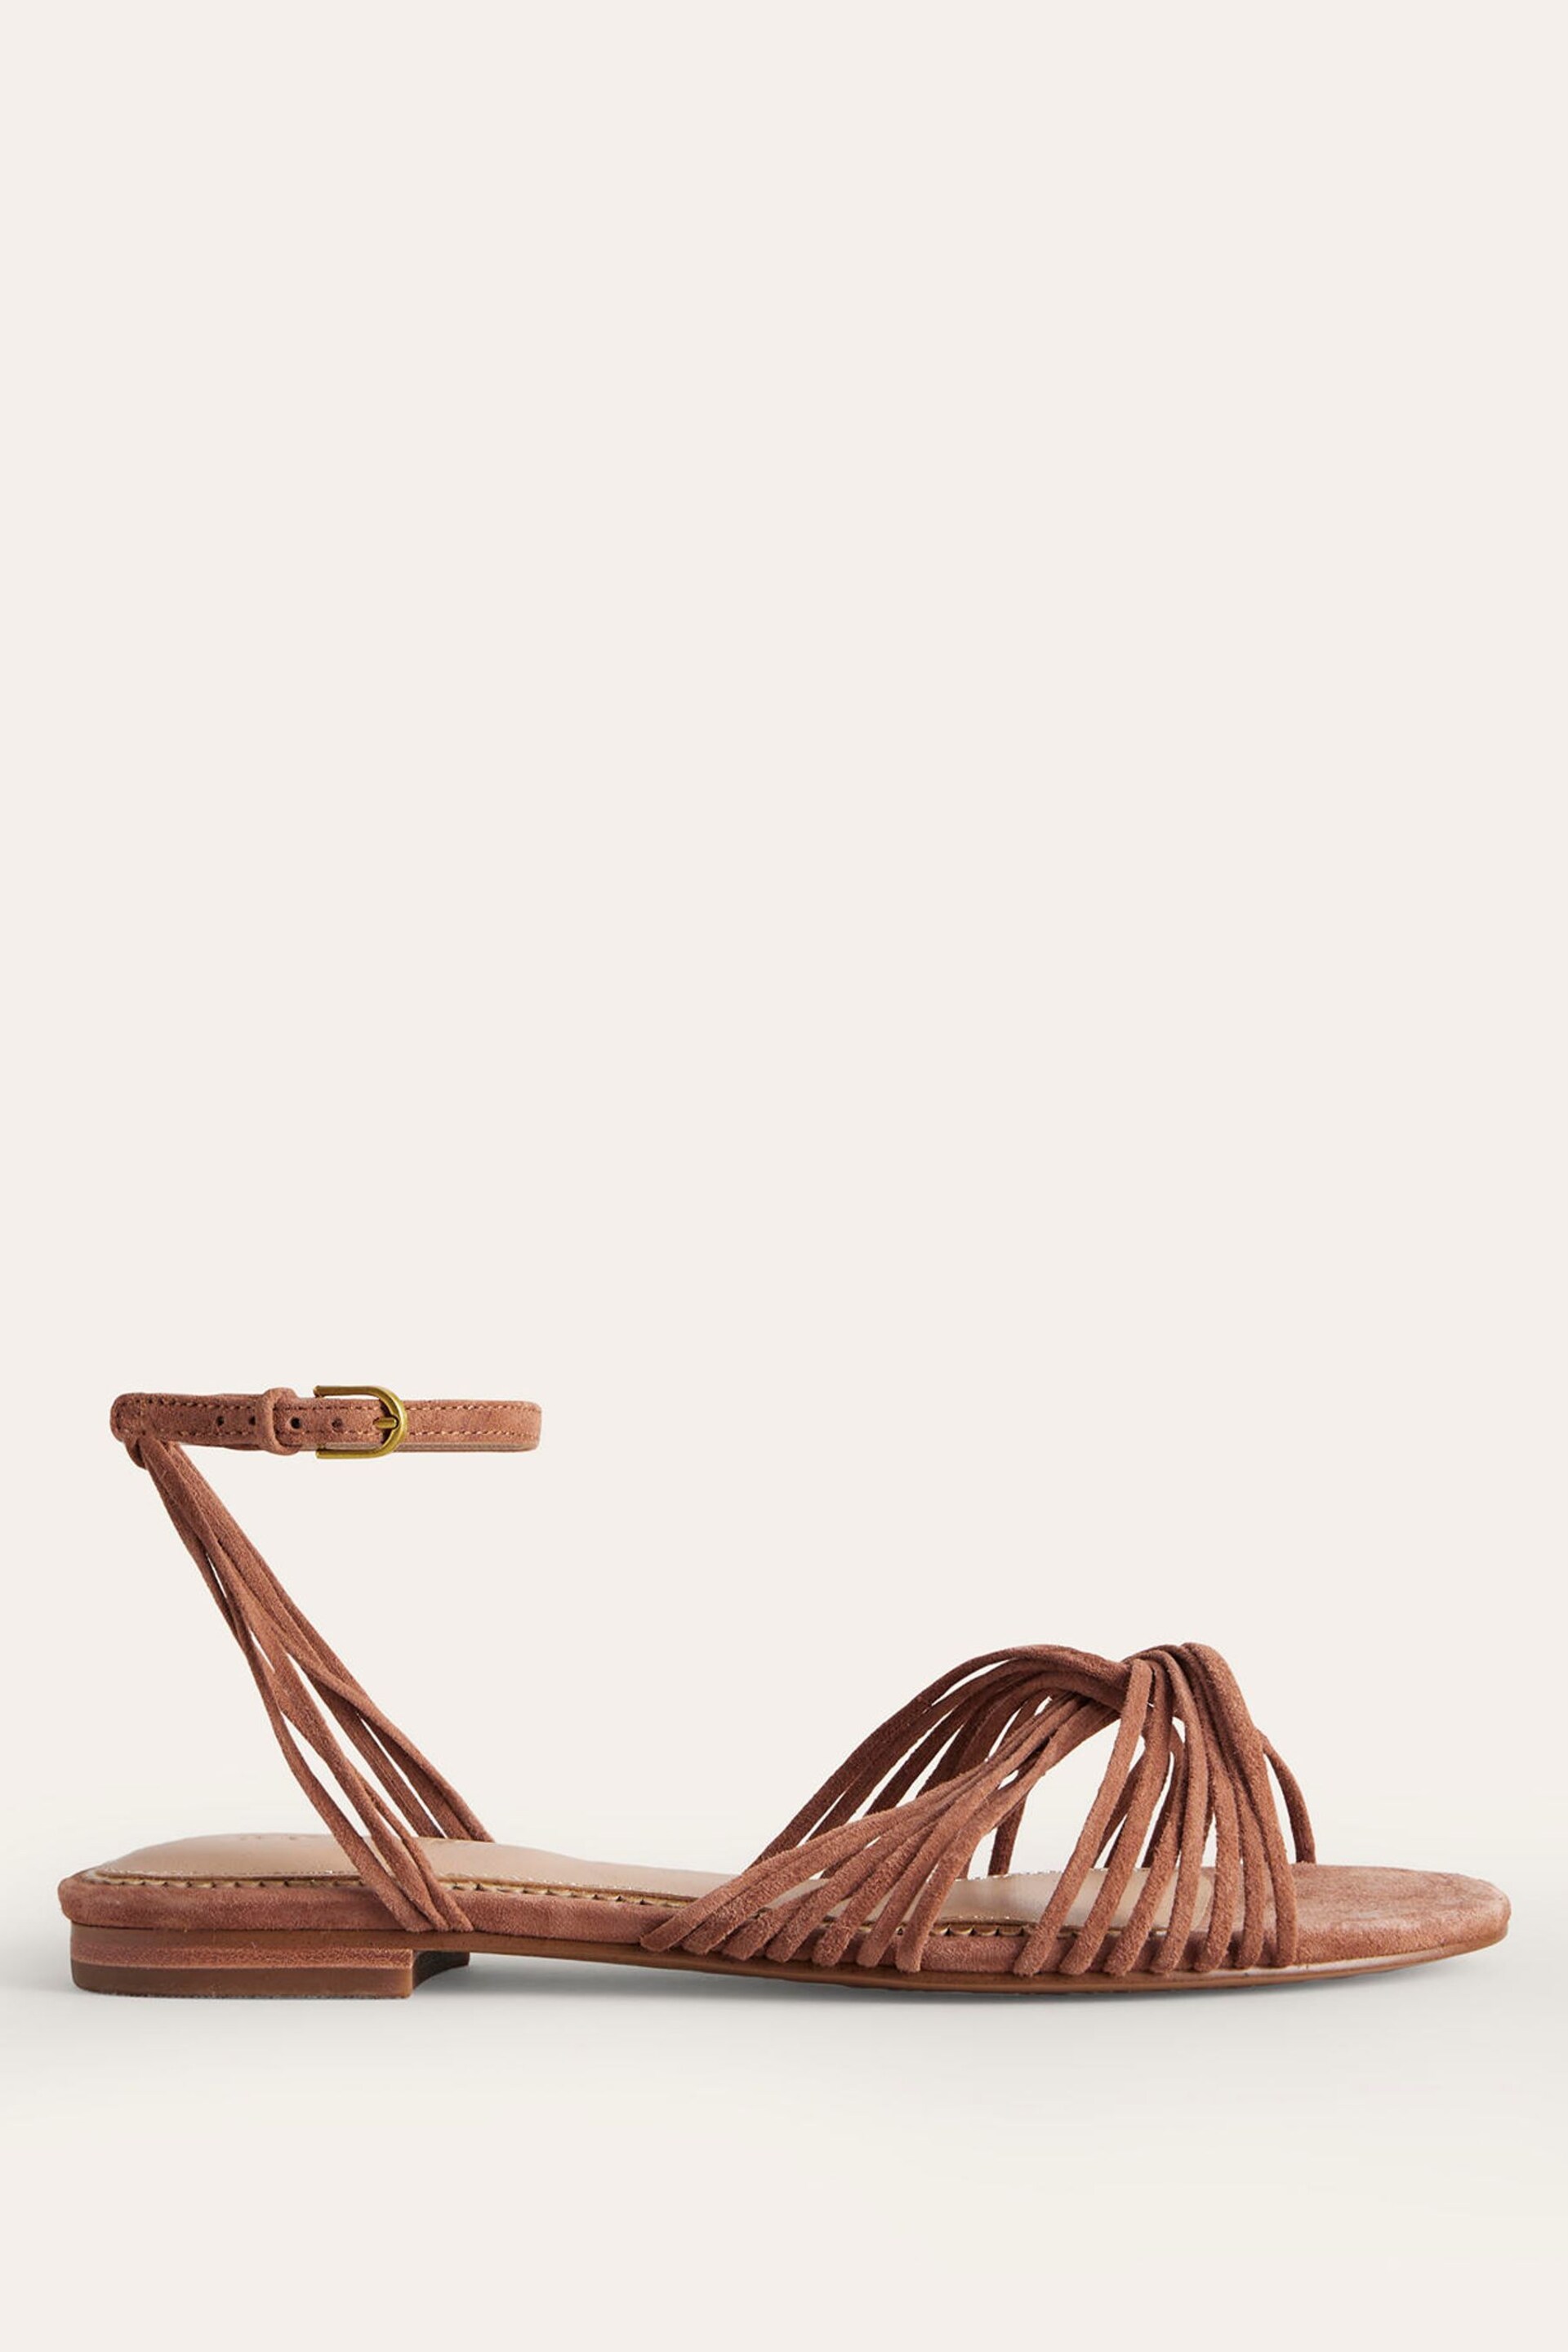 Boden Brown Twist Front Flat Sandals - Image 2 of 4